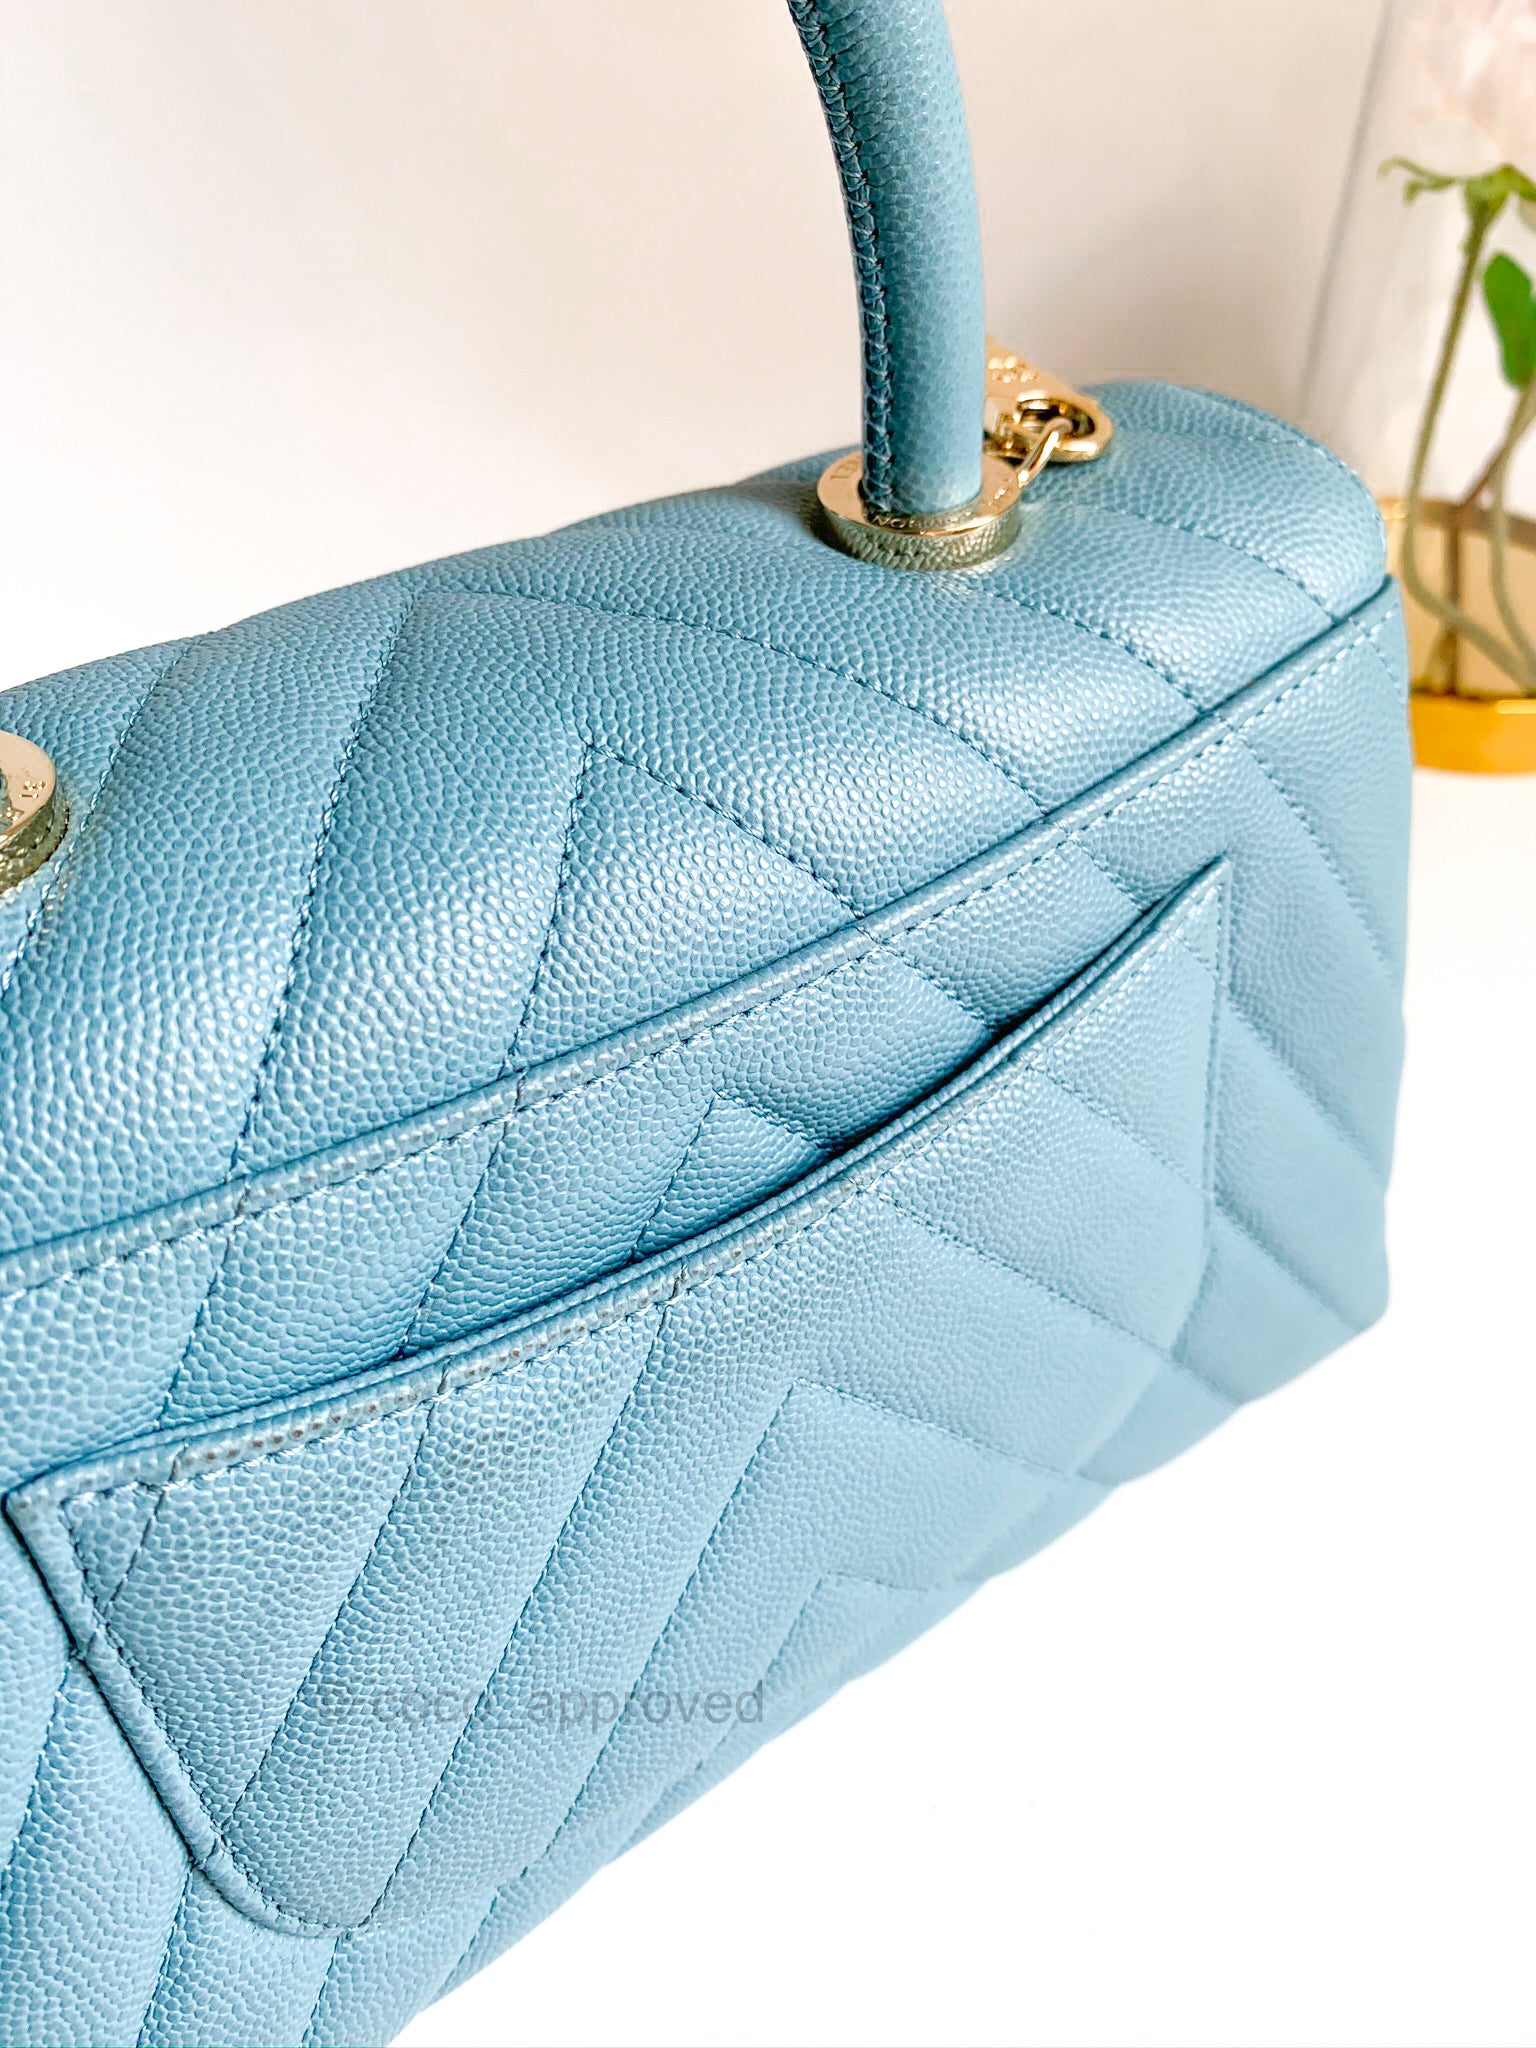 The glacier blue Chanel coco handle that cannot be refused : r/handbags